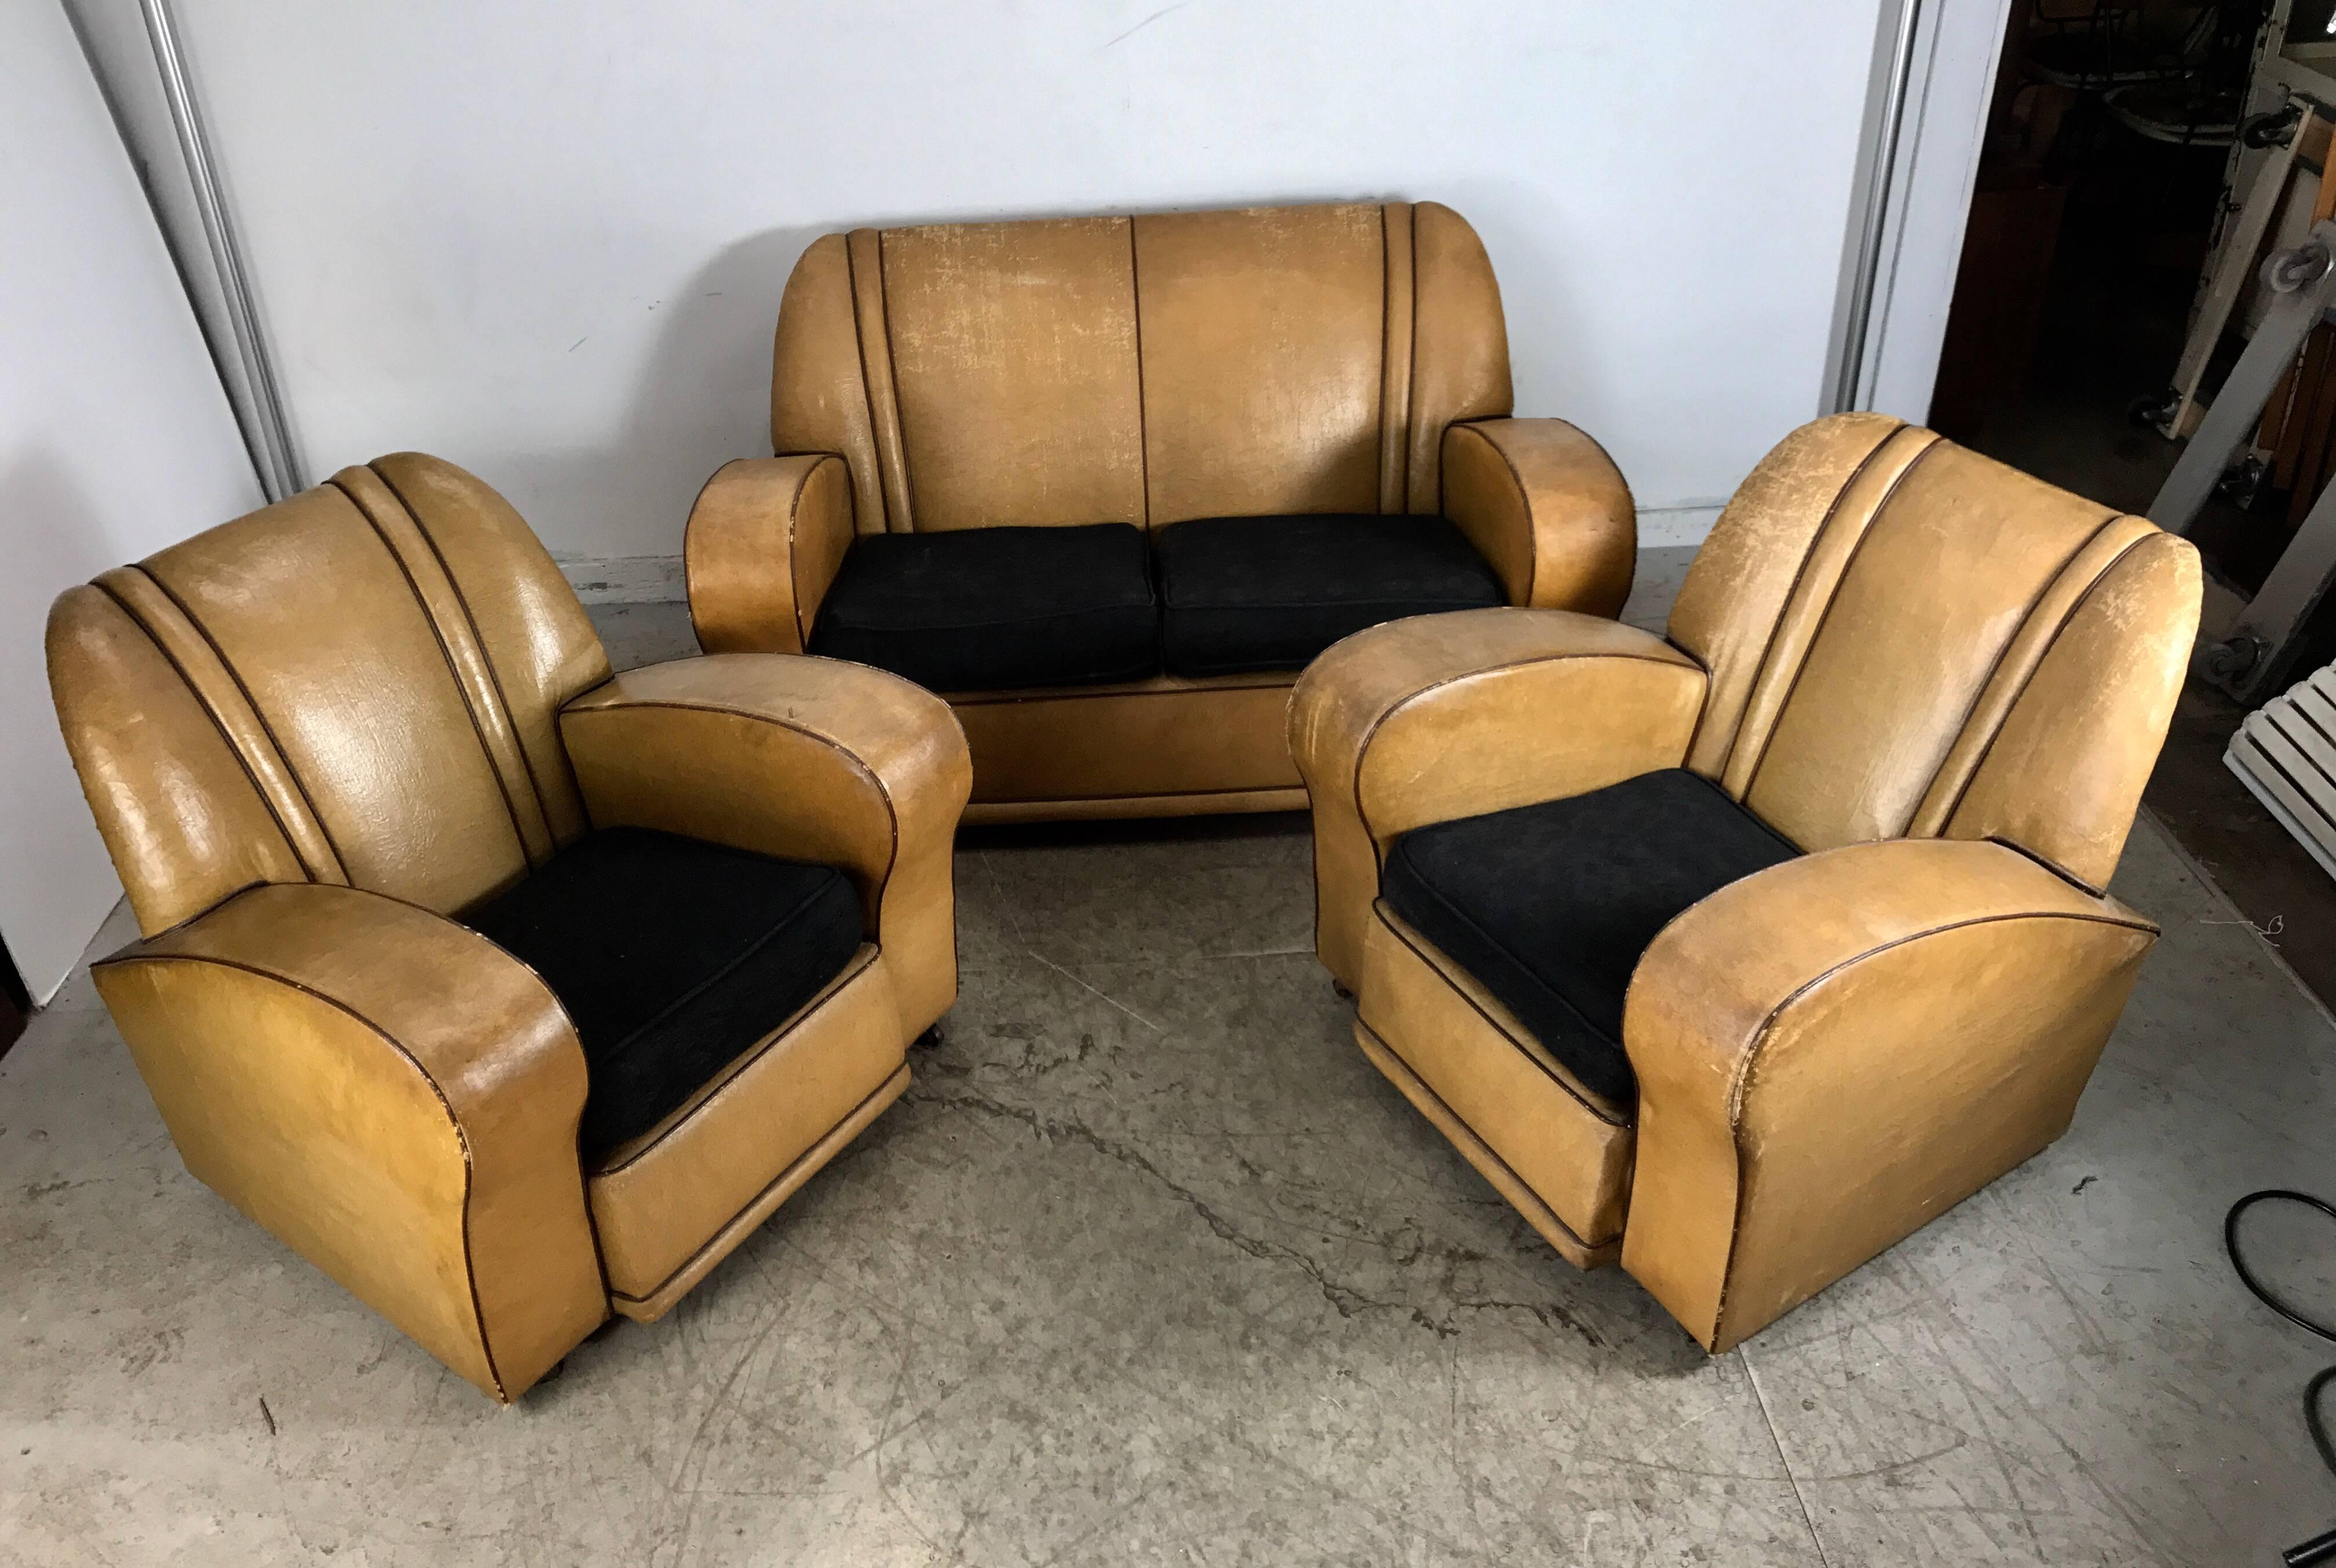 Three-Piece European Art Deco Suite, Matching Sofa and Club Chairs In Distressed Condition For Sale In Buffalo, NY